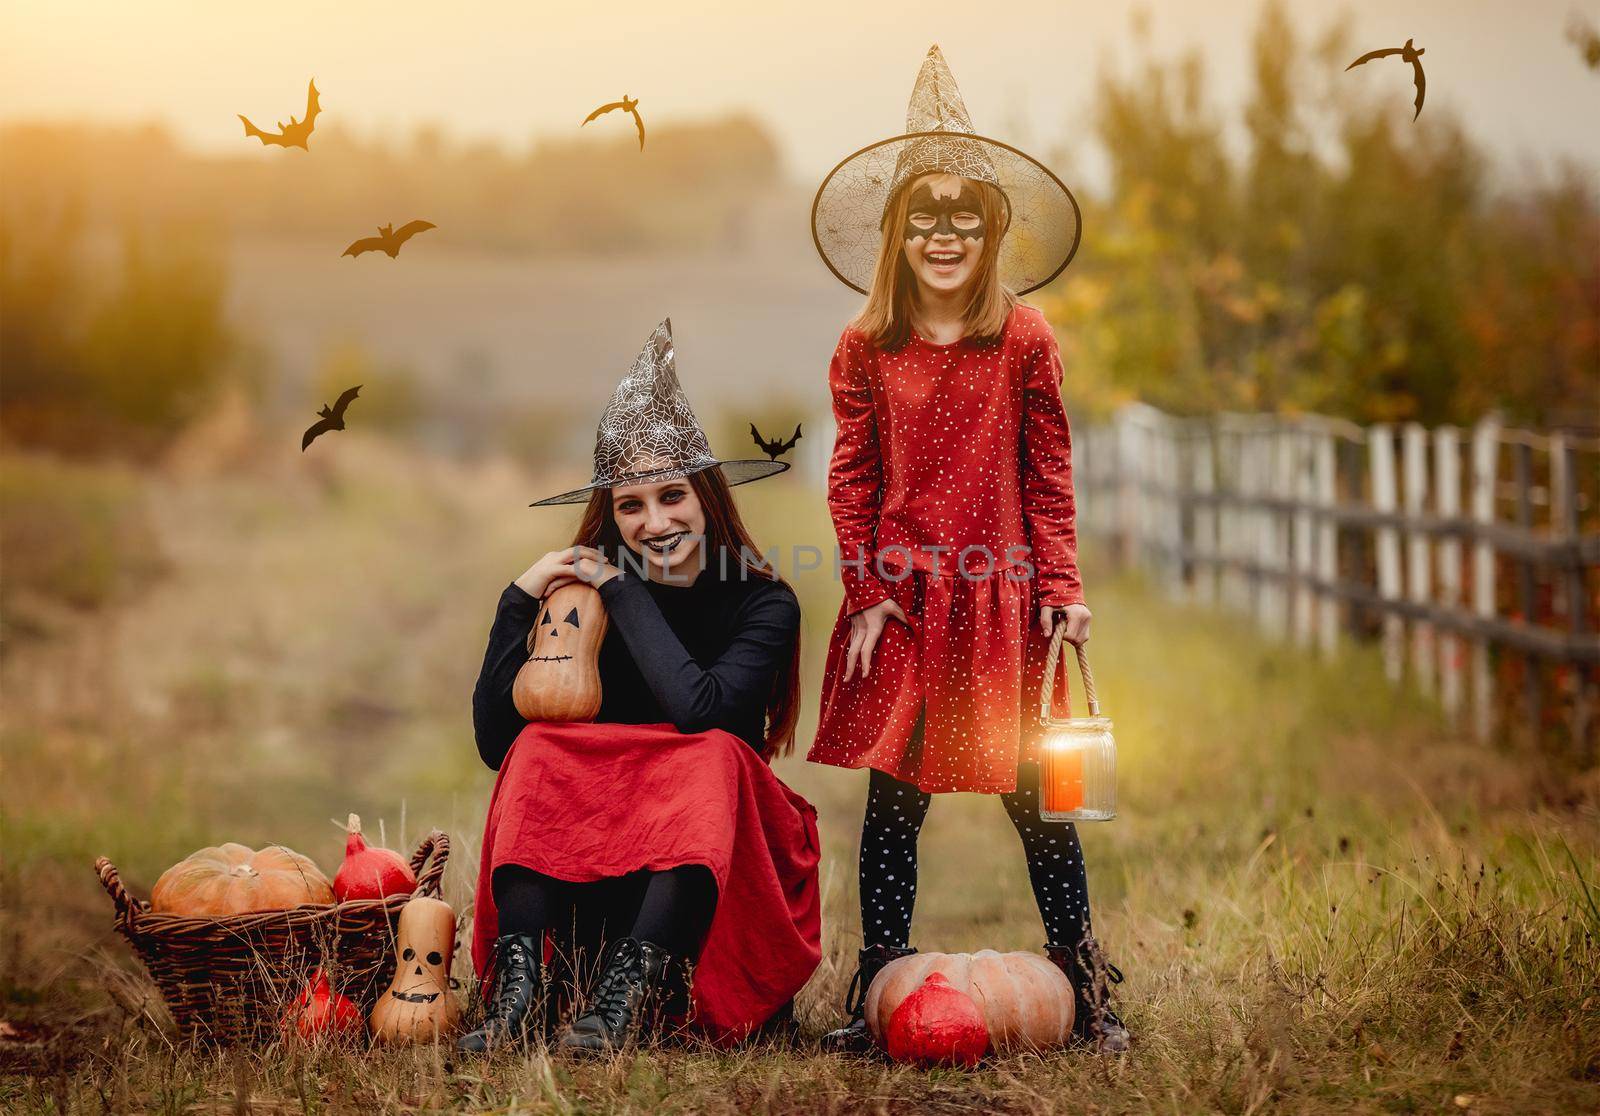 Children dressed for halloween with festive decorations on autumn nature background